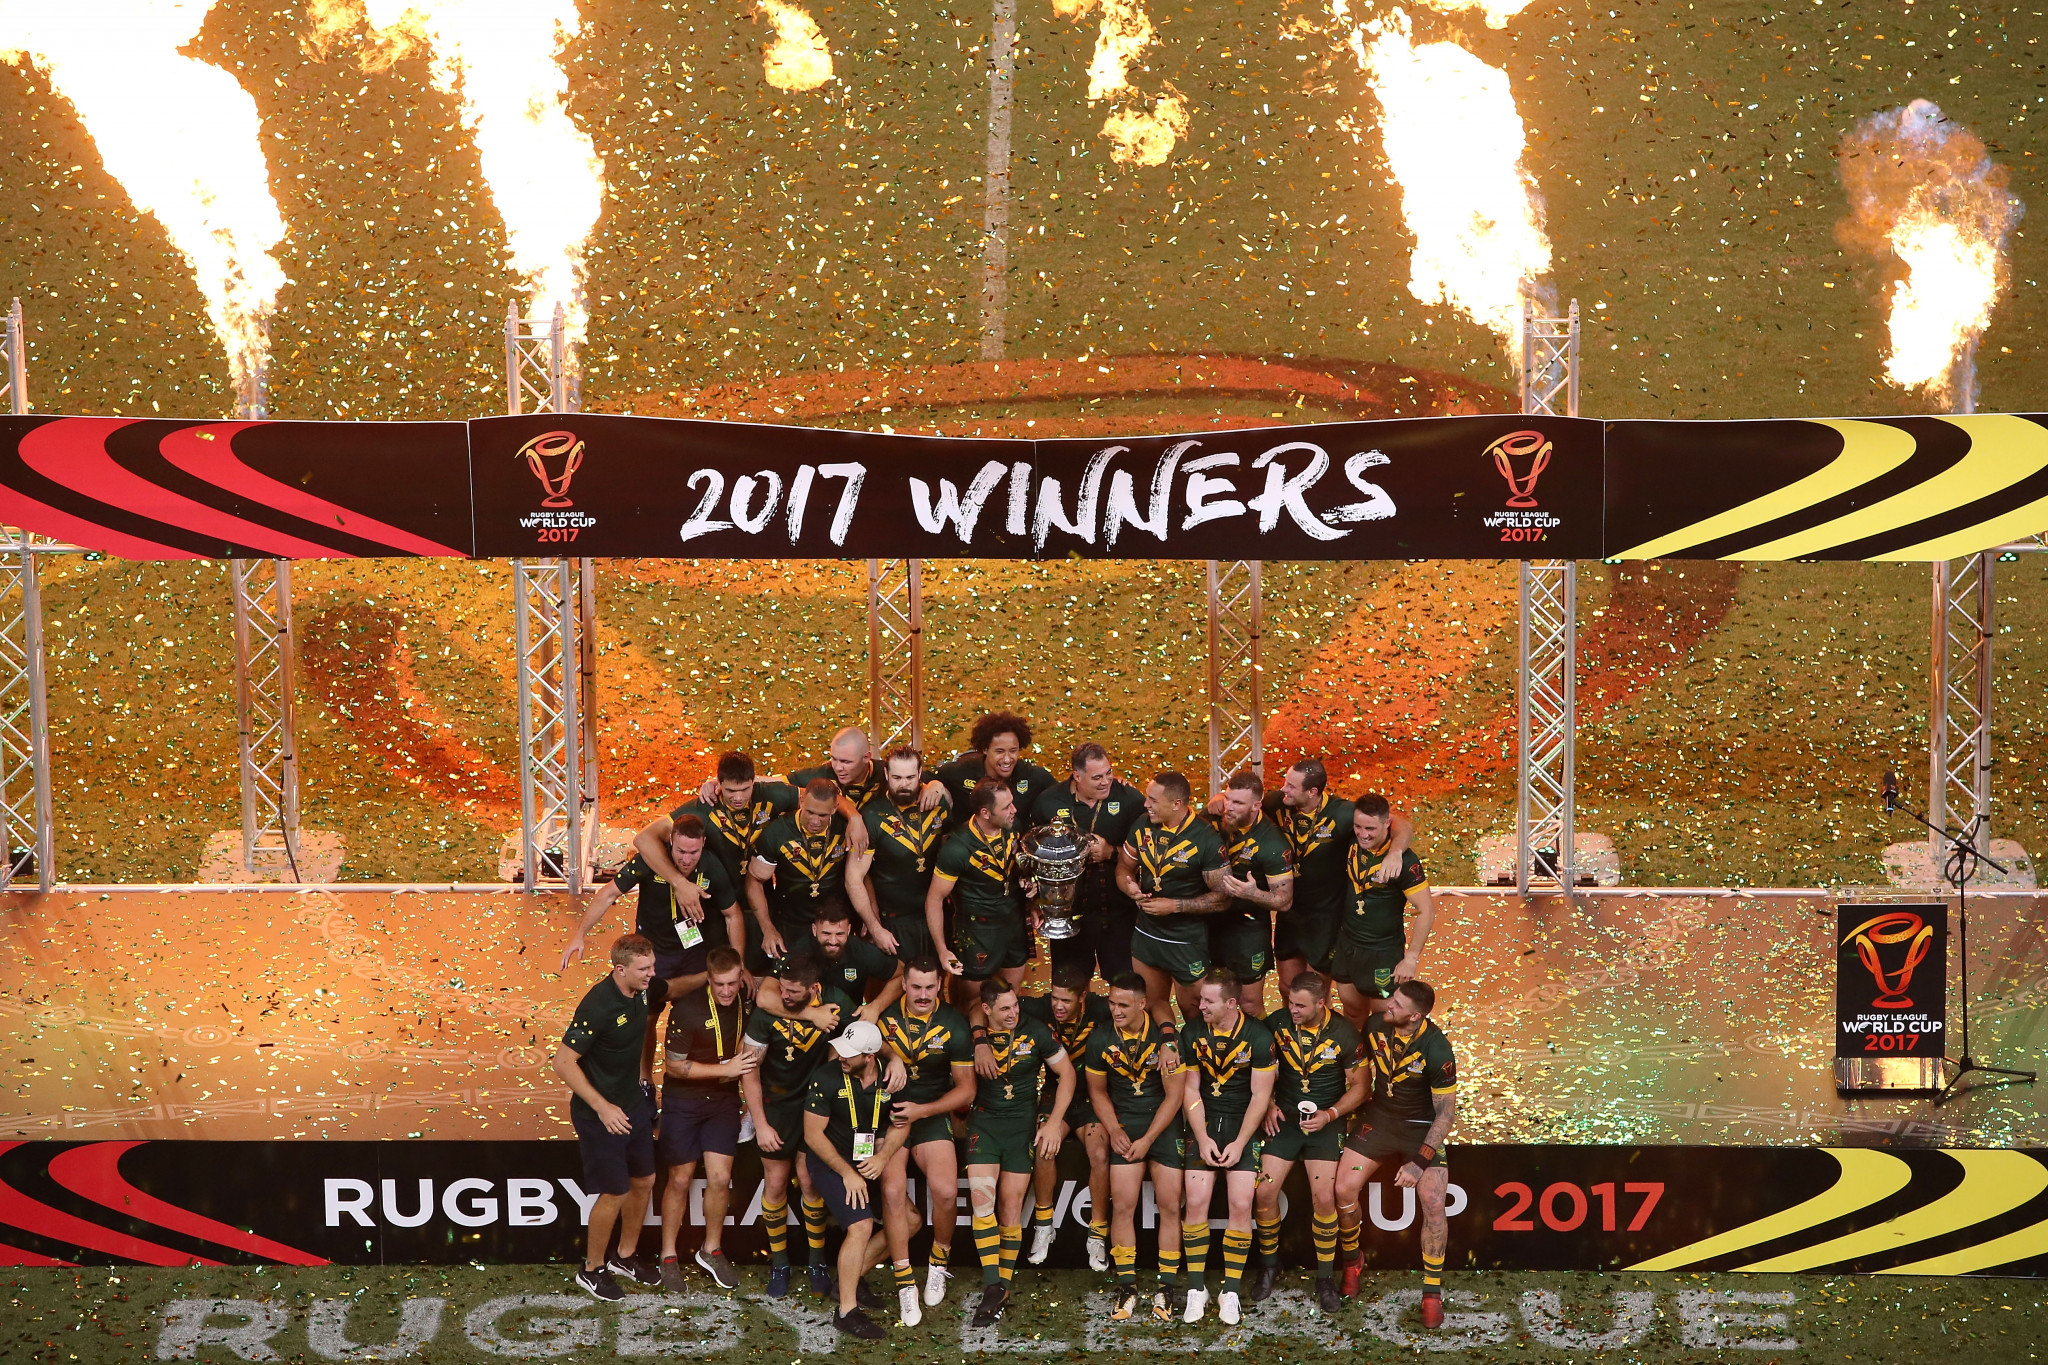 As it stands, the holders of the men's and women's Rugby League World Cups - Australia - will not be defending their titles ©Getty Images